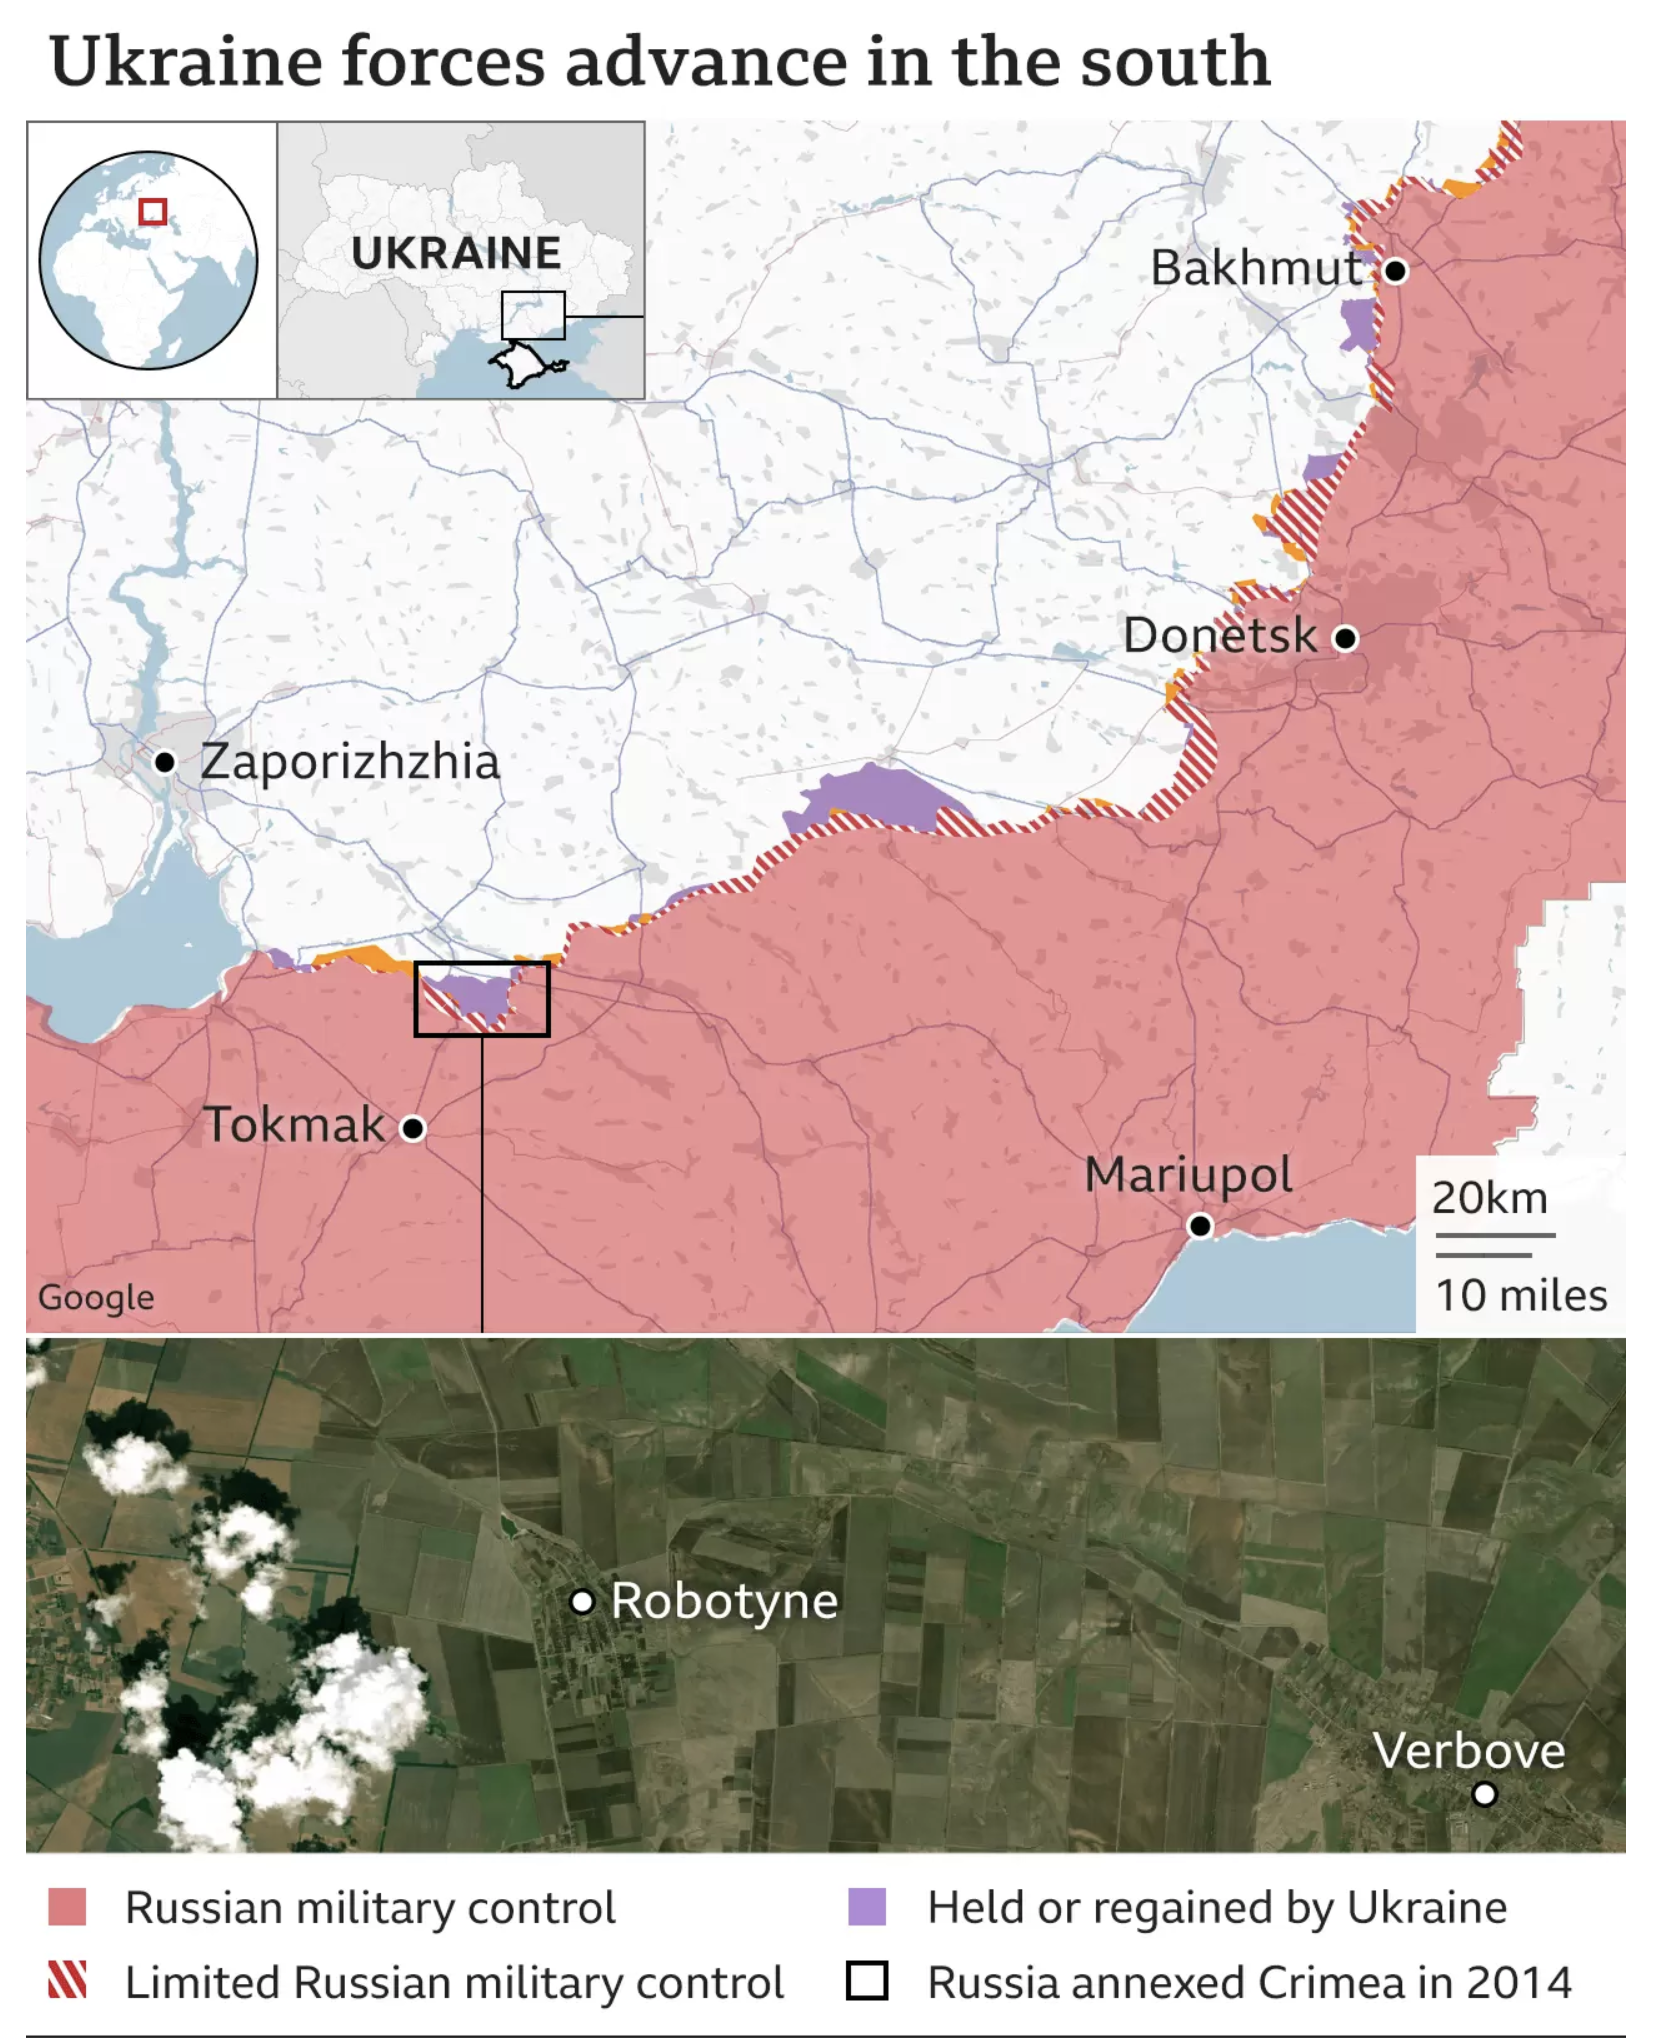 Ukraine's counter-offensive: missing the forest from the trees